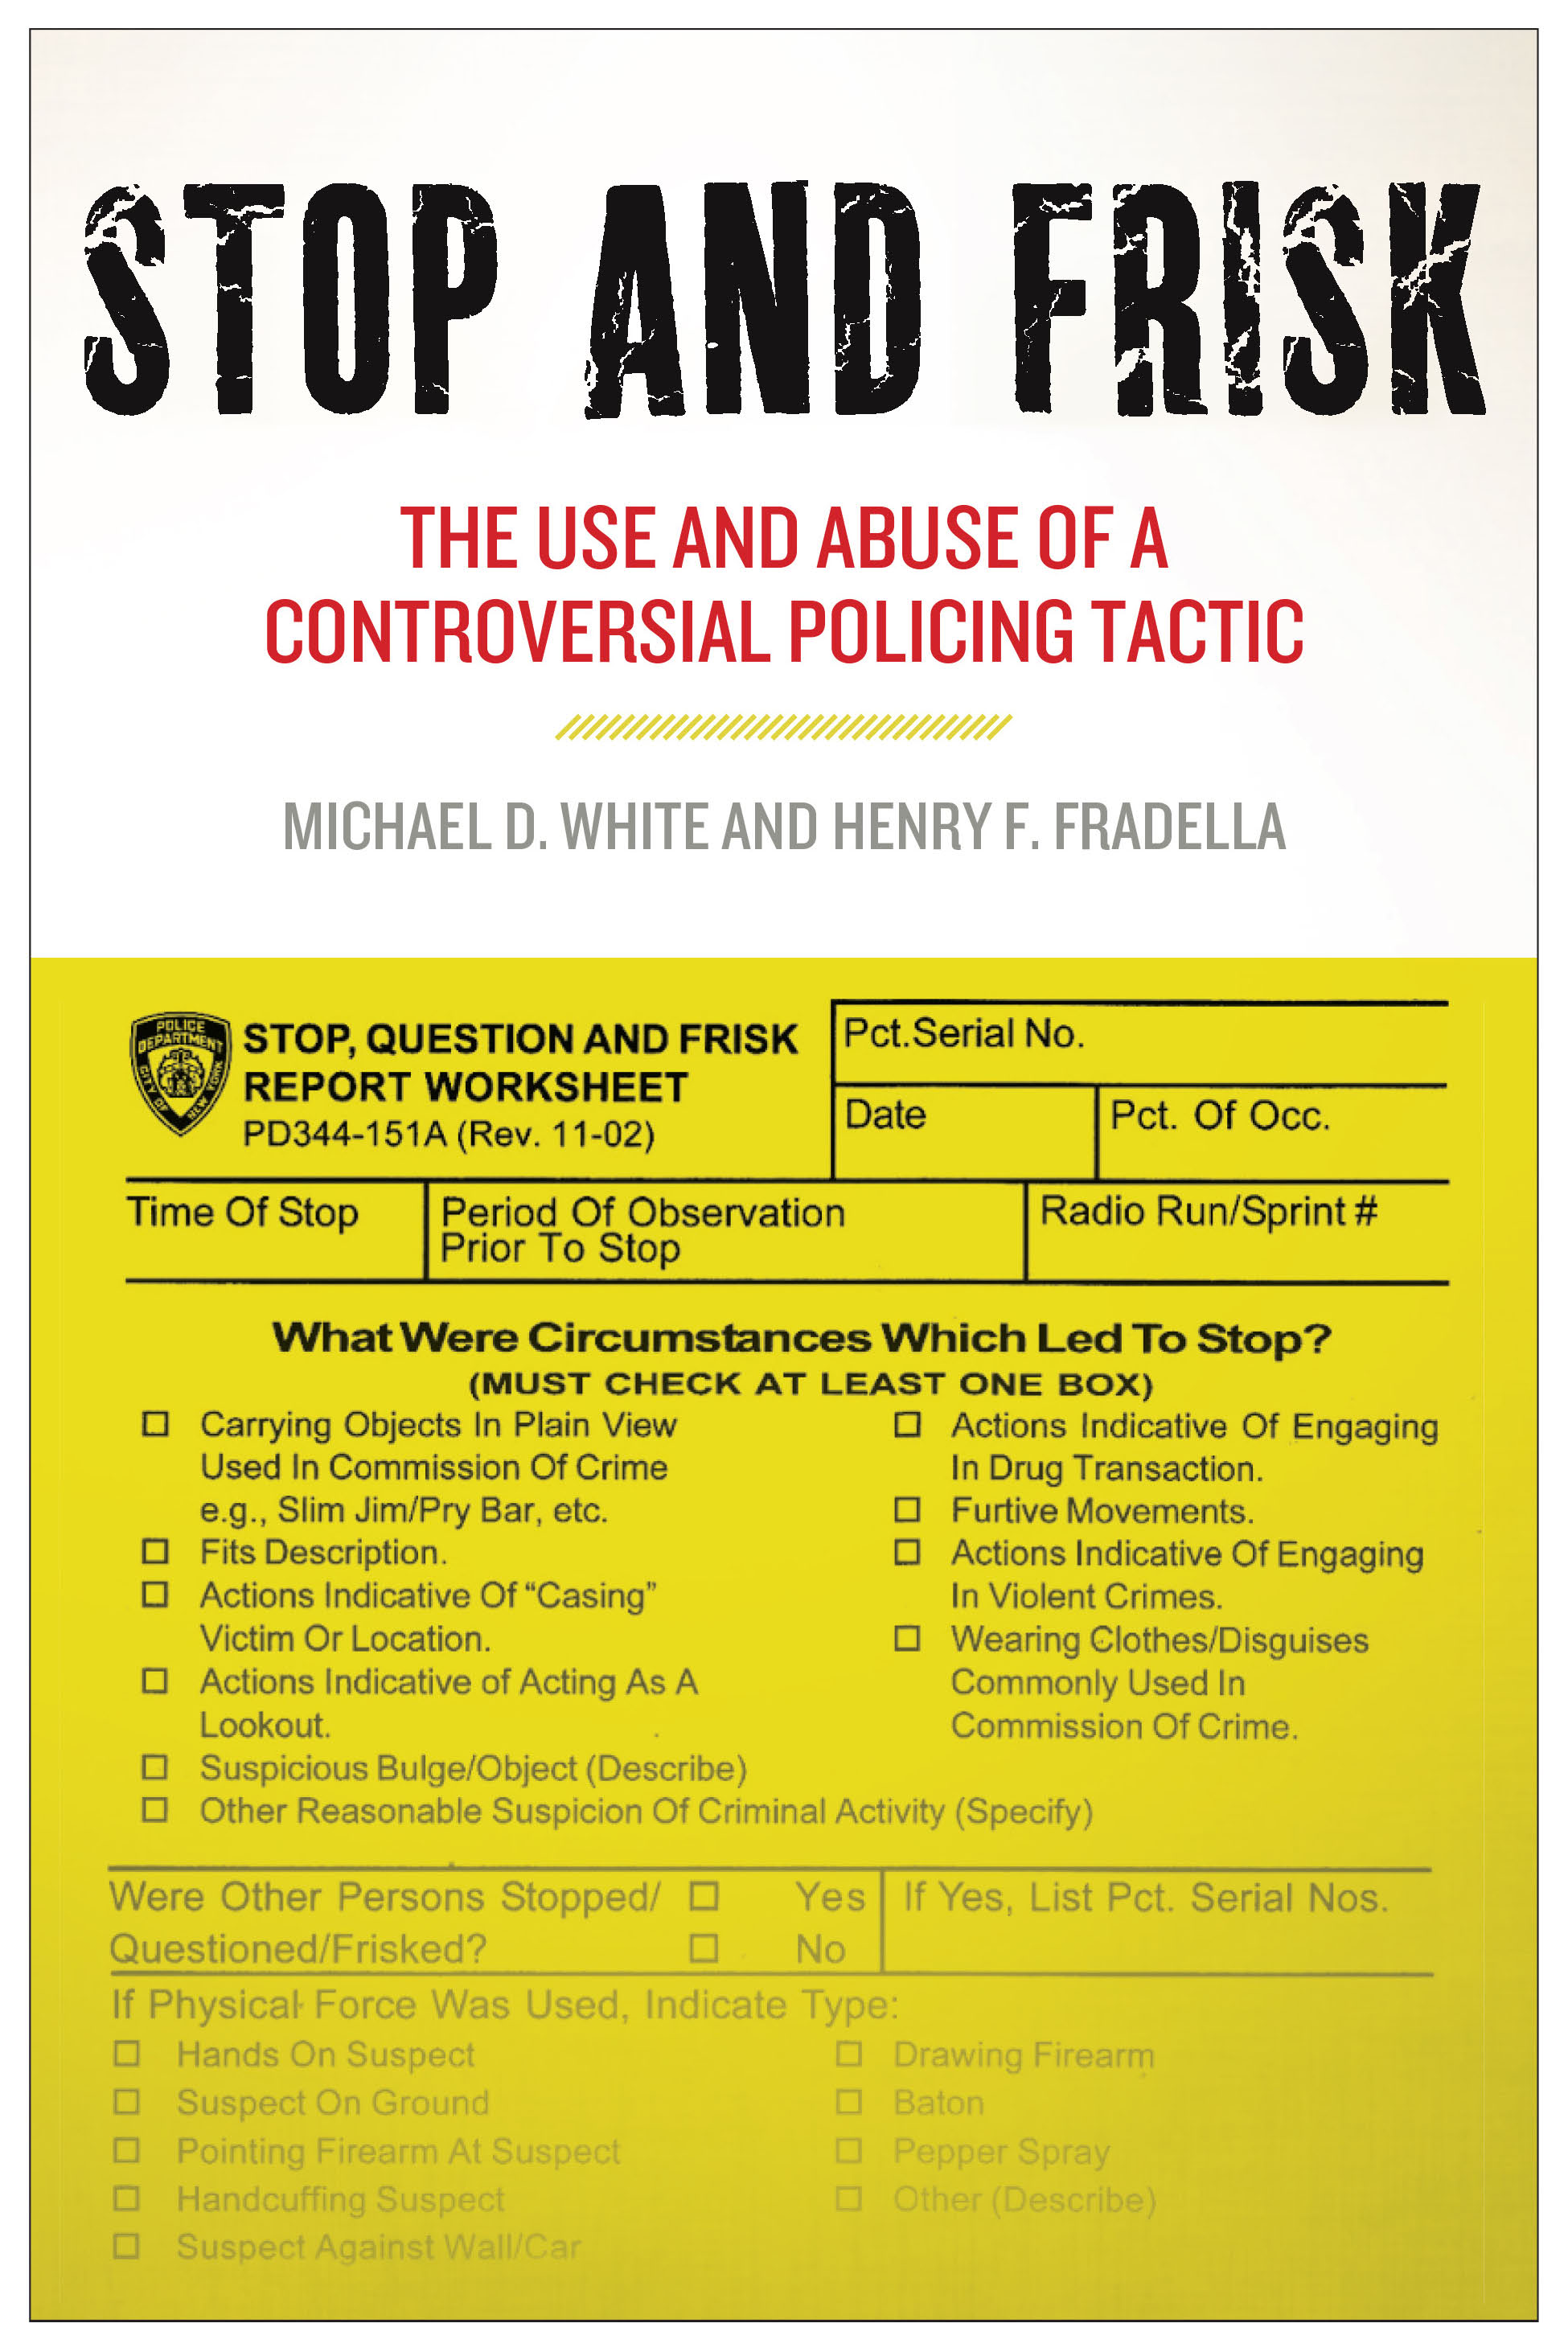 Book cover - Stop and Frisk: The Use and Abuse of a Controversial Police Tactic